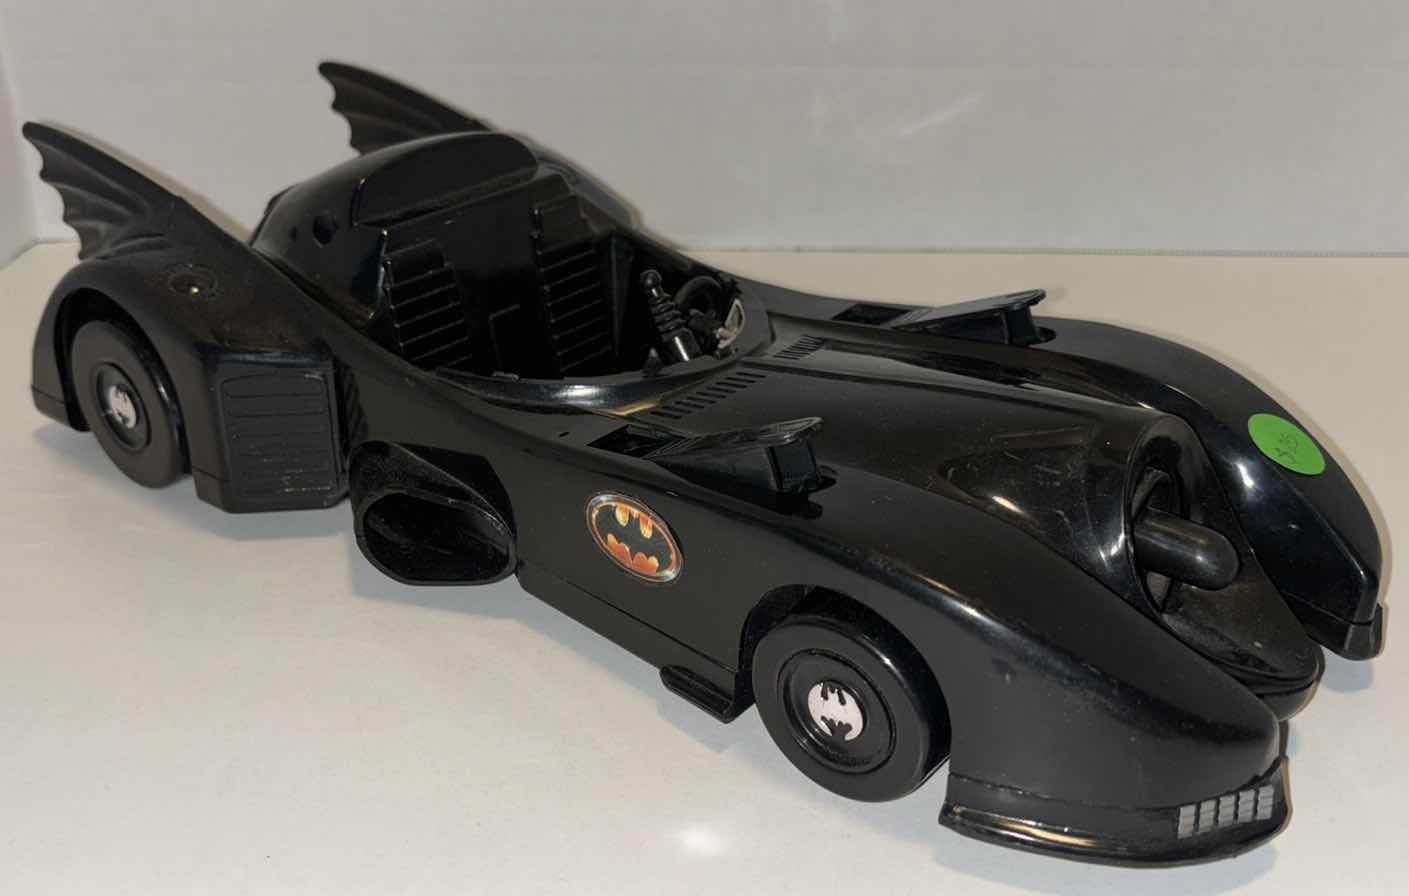 Photo 8 of ASSORTED VERSIONS OF BATMOBILE VEHICLES (3)